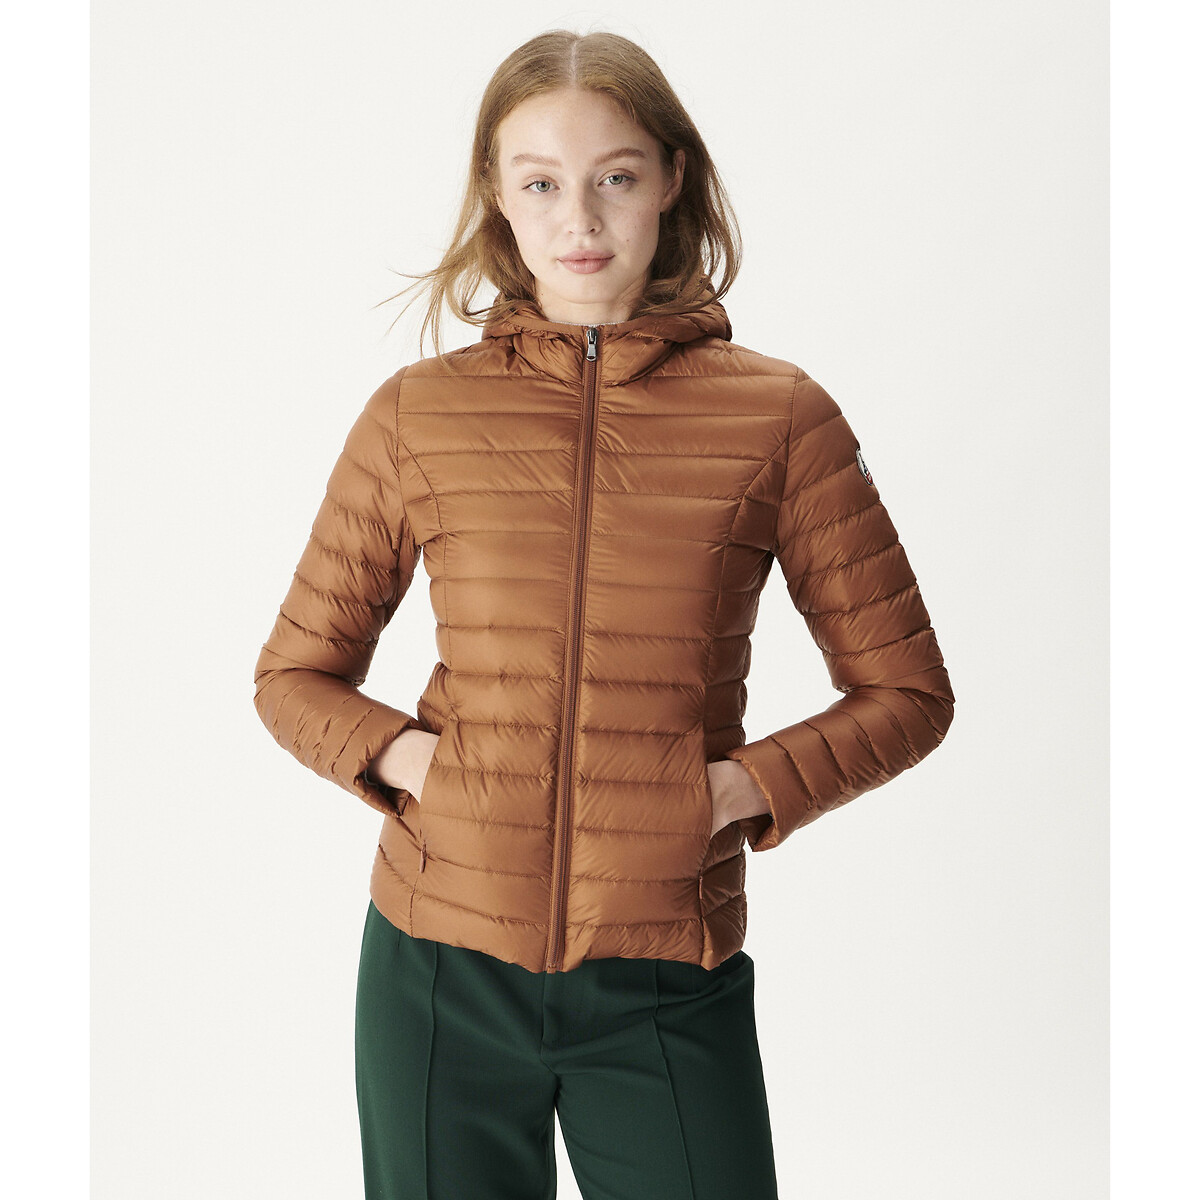 Cloe quilted padded jacket with hood and zip fastening, caramel, Jott ...